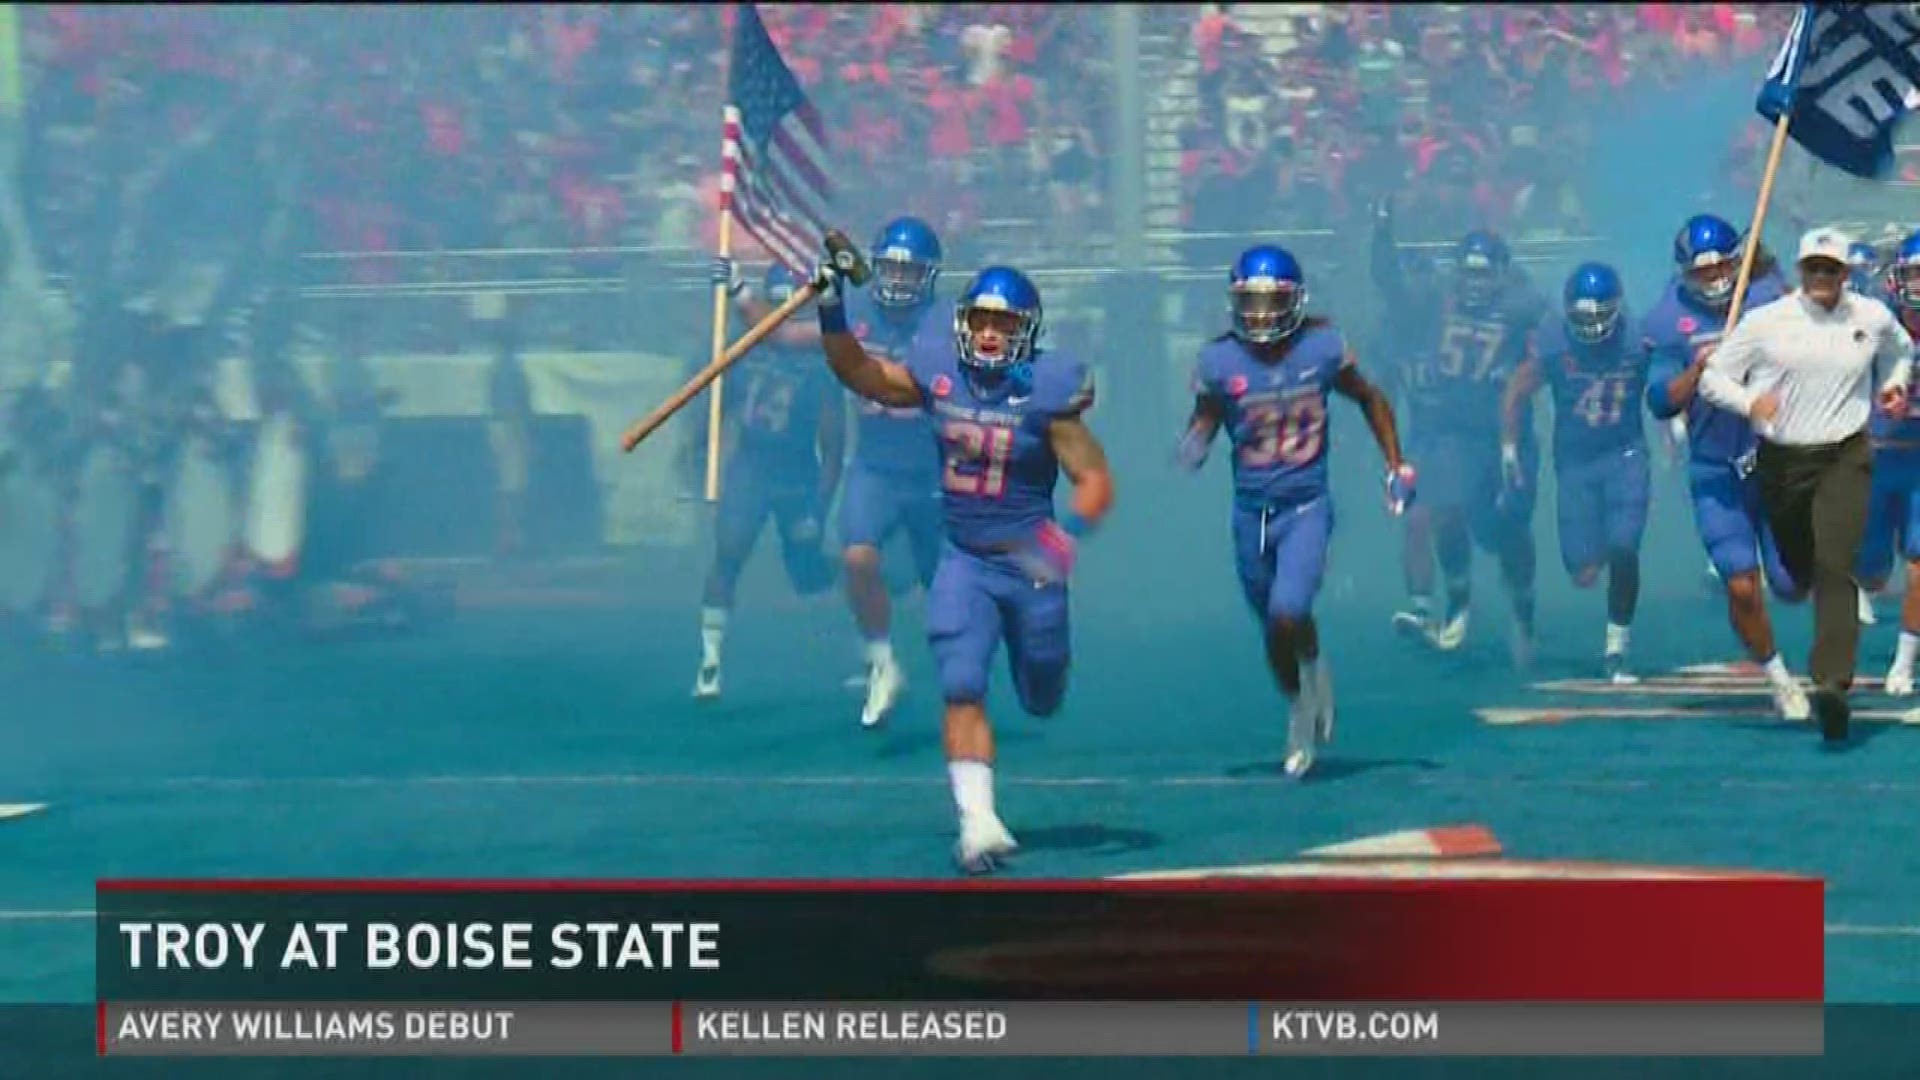 The Boise State Broncos defeated the Troy (Alabama) Trojans 24-13 in Albertsons Stadium